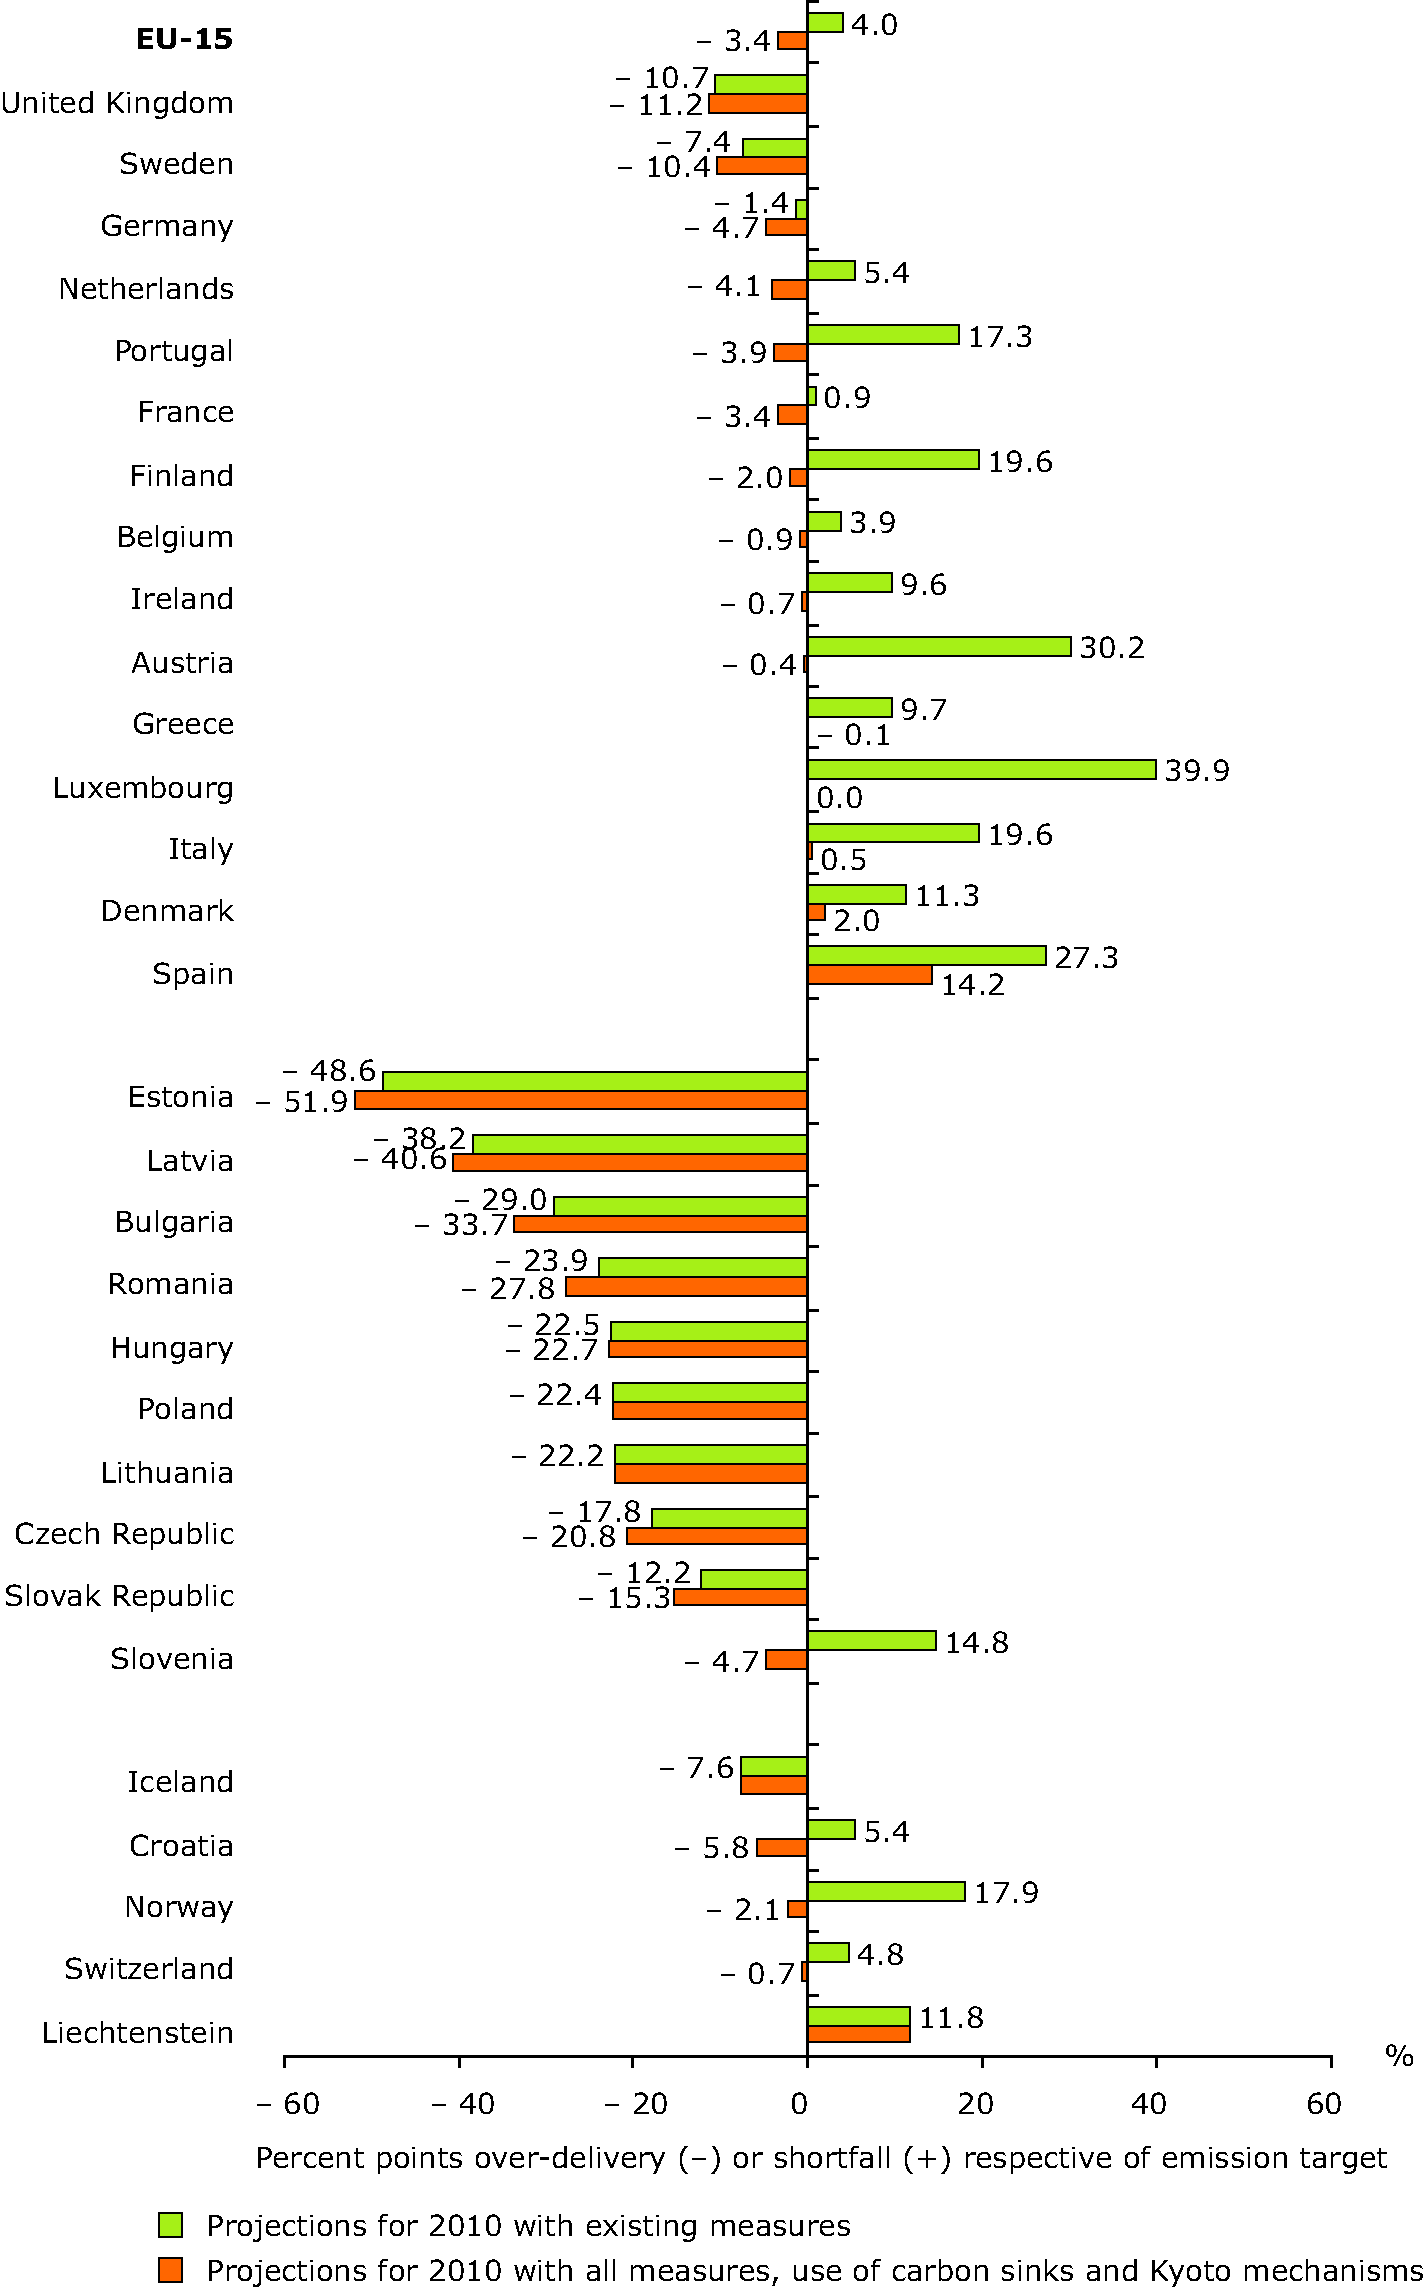 Relative gaps between EU Kyoto and burden-sharing targets and projections for 2010 for EU Member States, EU candidate countries and other EEA member countries